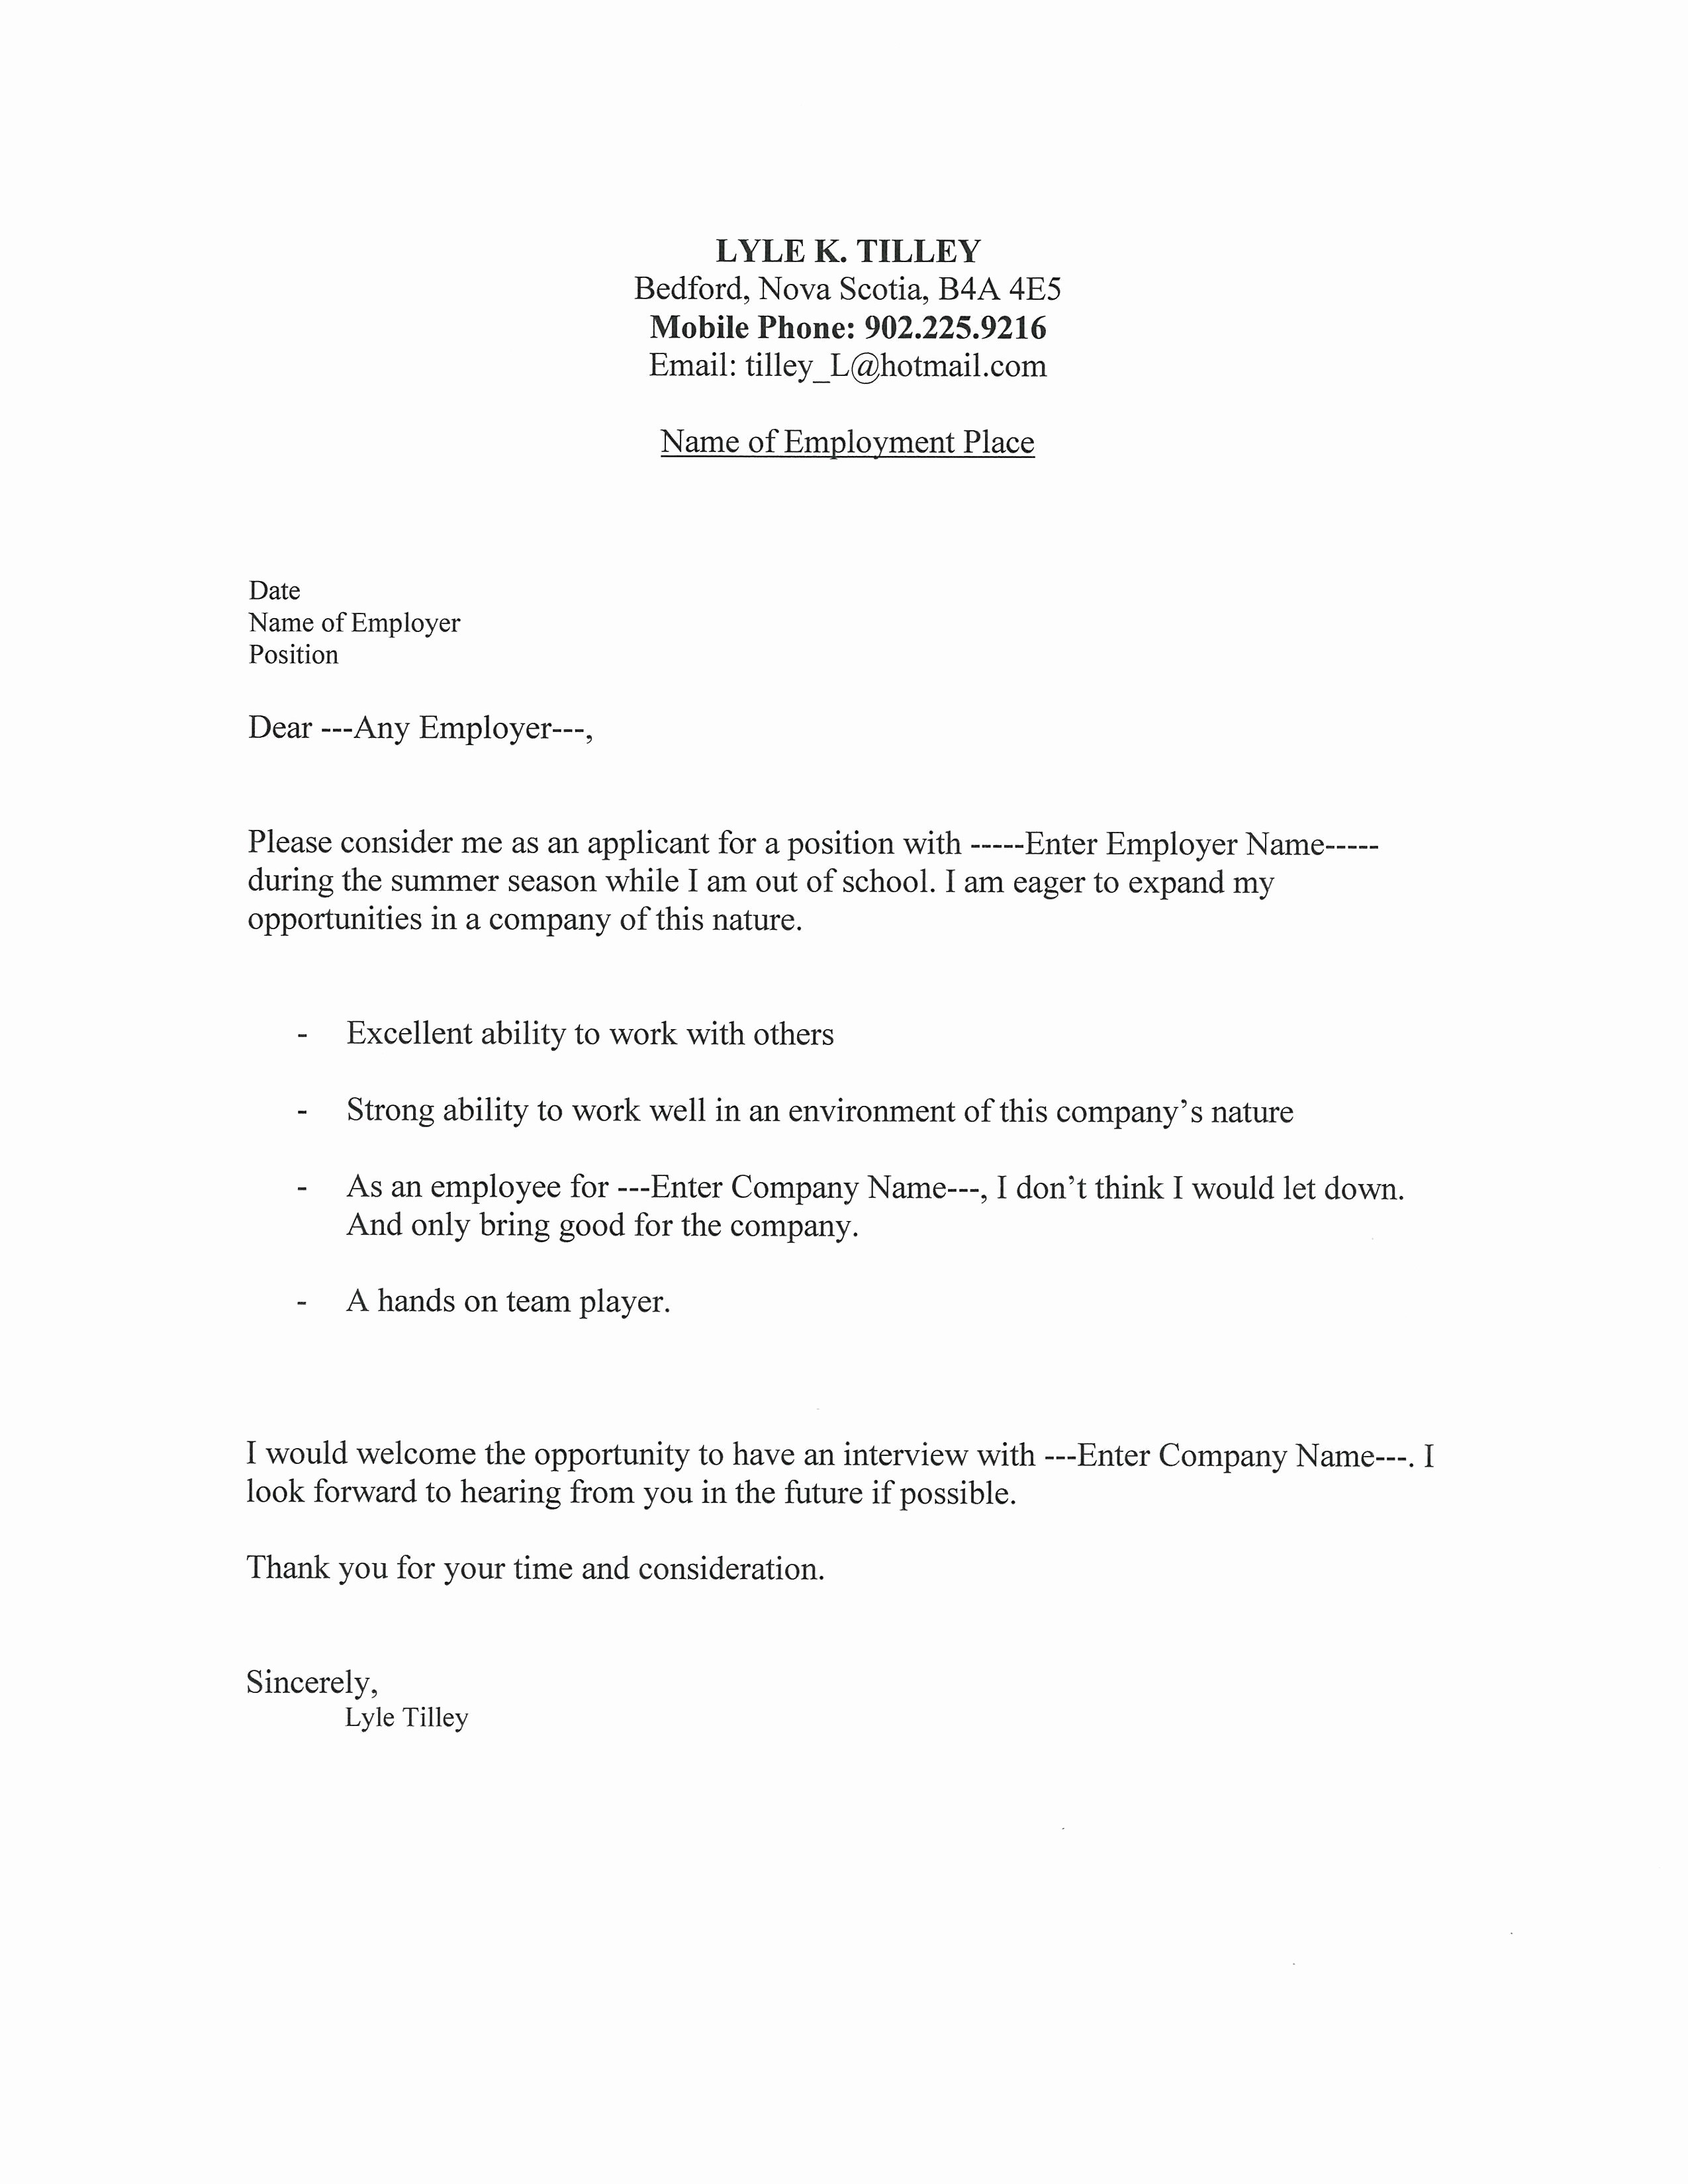 Professional Cover Letters for Resume Best Of Best Cover Letter for Resume 2016 Samplebusinessresume